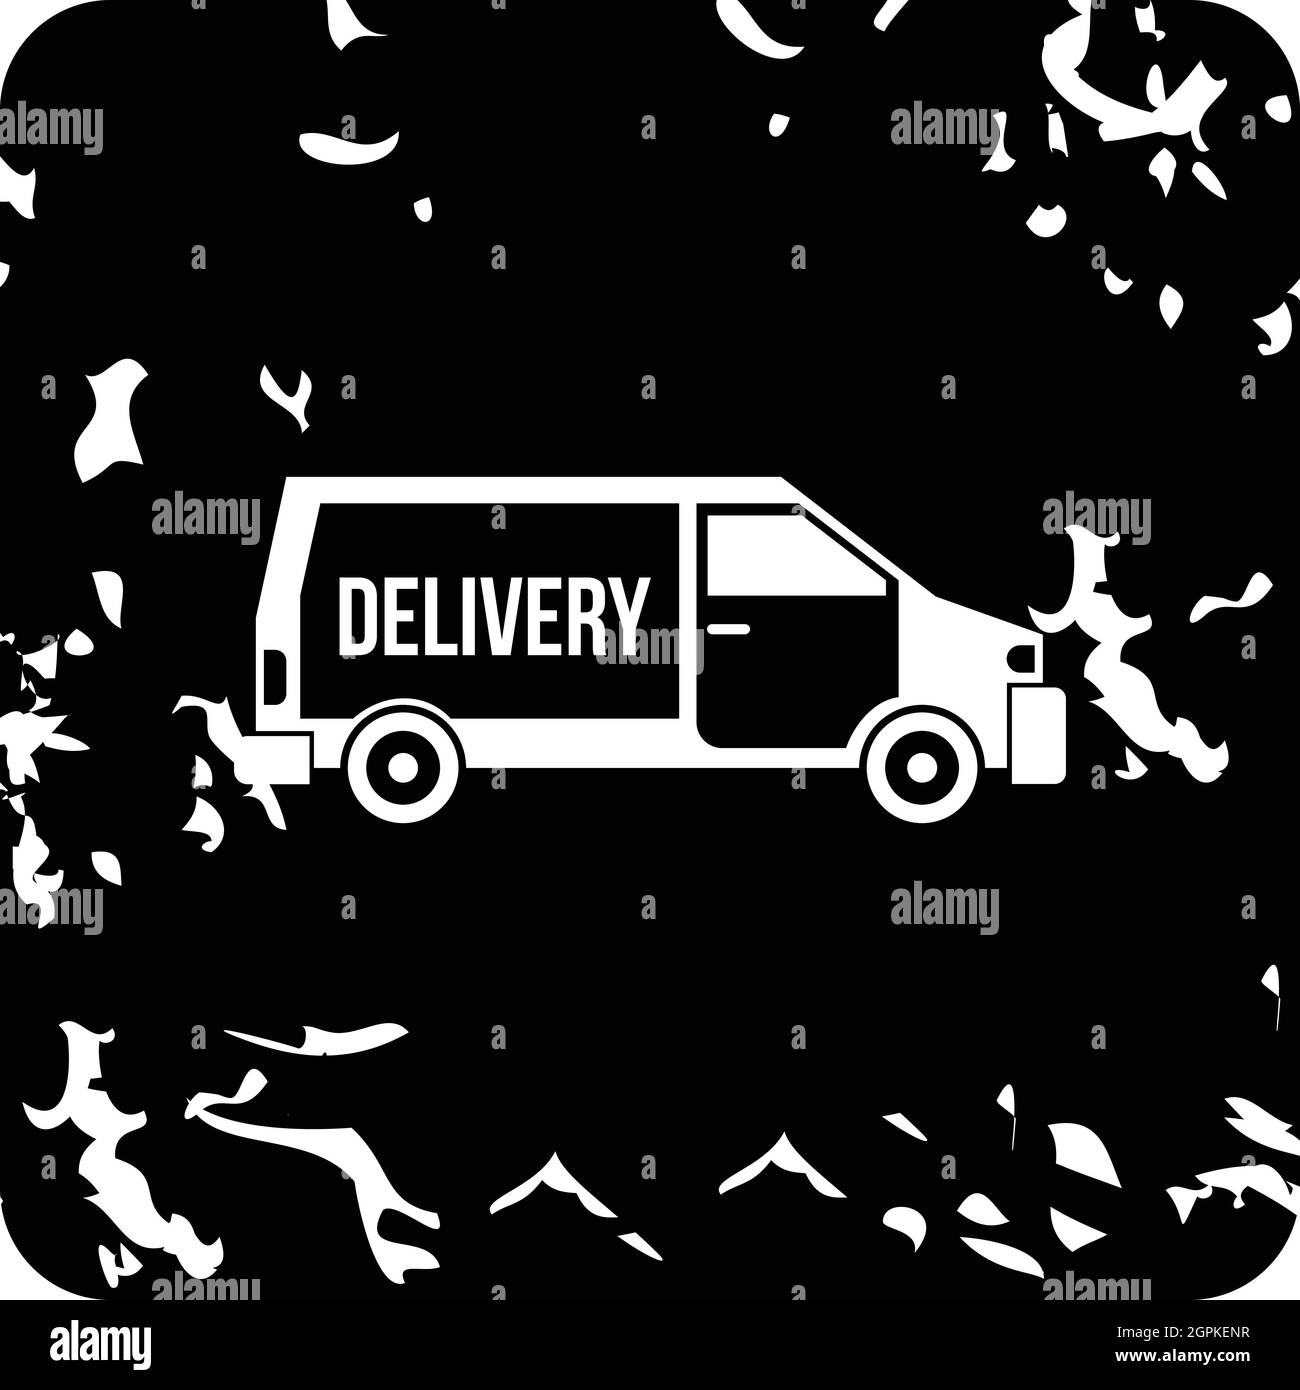 Delivery van icon, grunge style Stock Vector